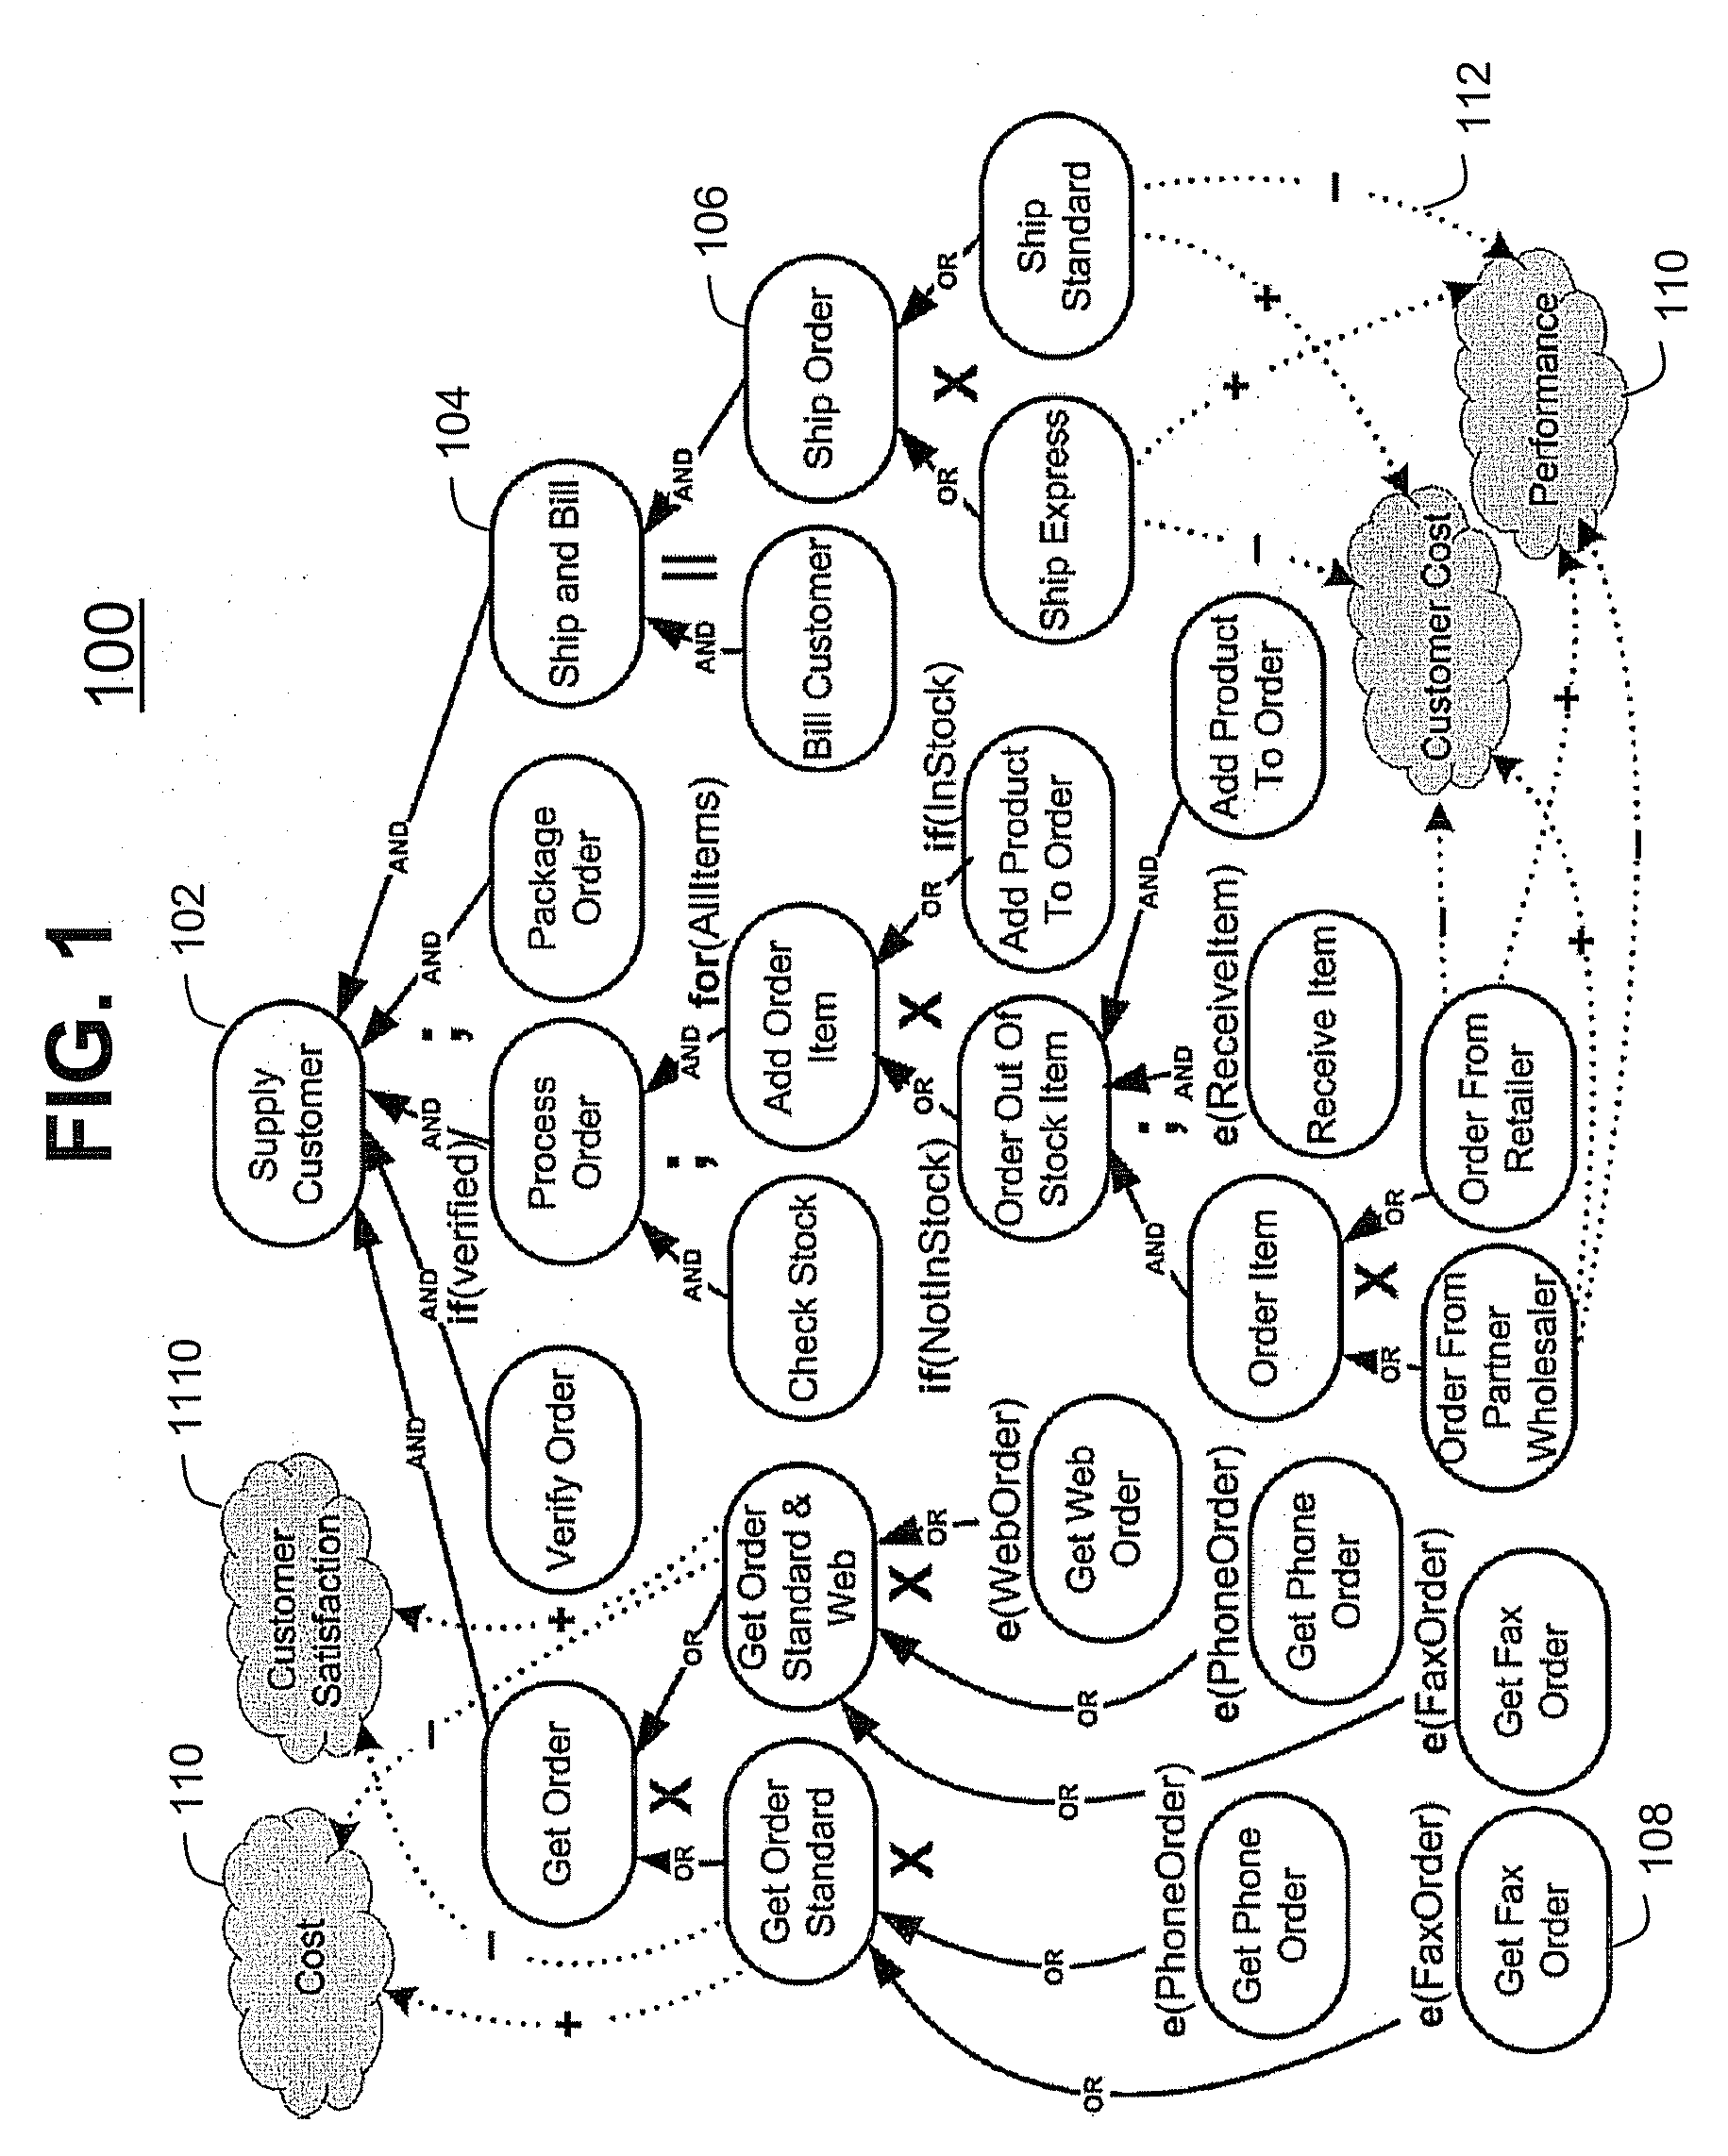 Method and tool for business process adaptation using goal modeling and analysis